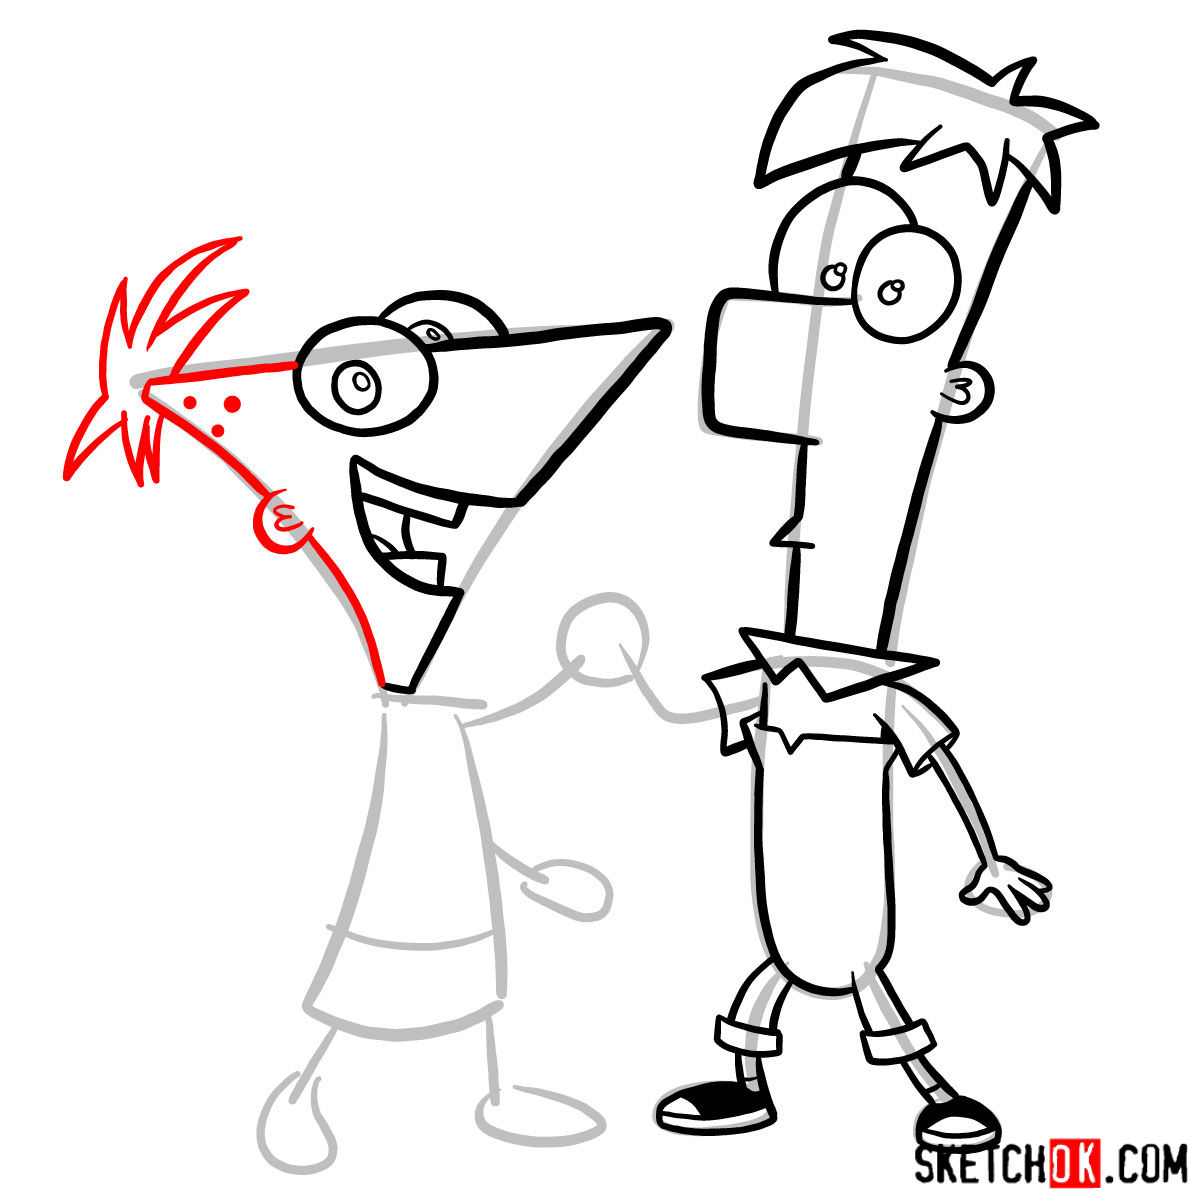 How to draw Phineas and Ferb - step 10